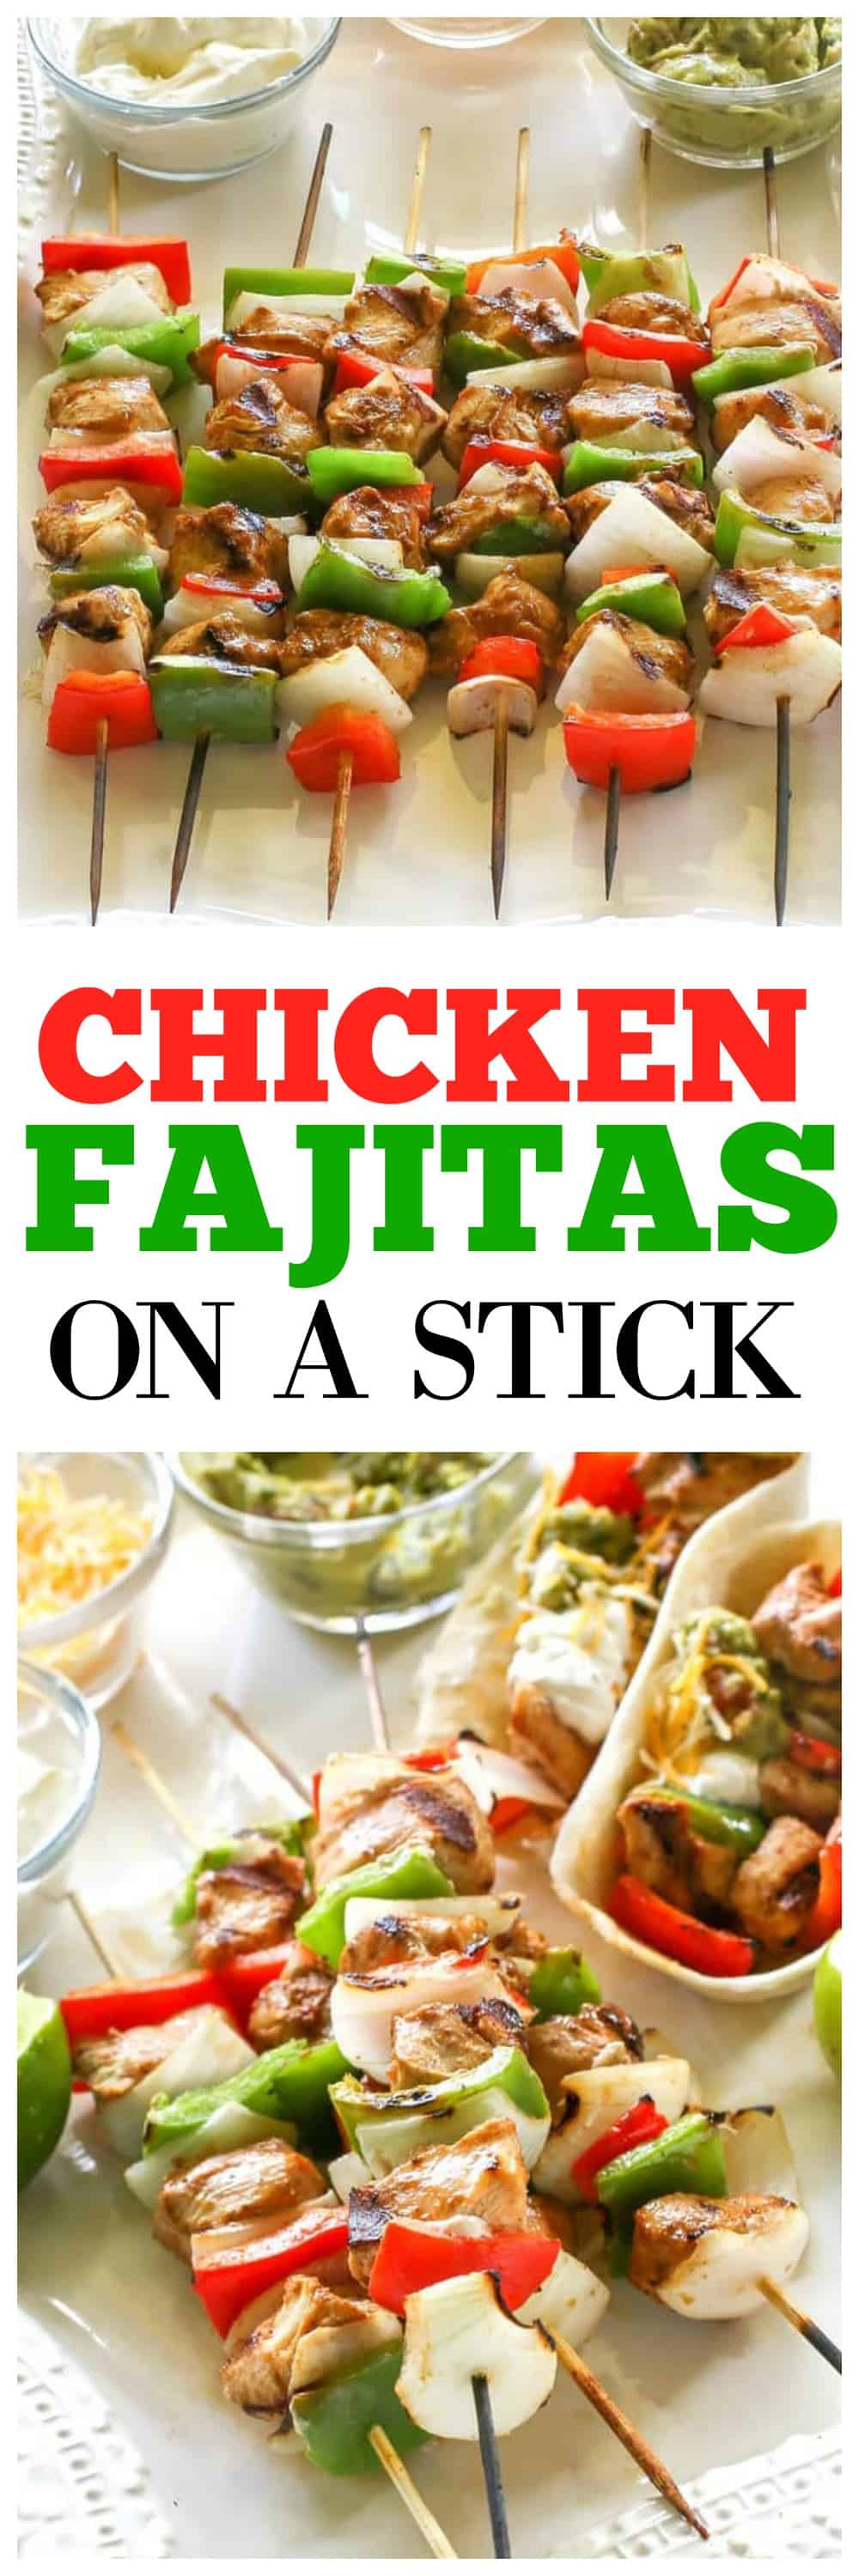 These Fajitas on a Stick are a fun way to serve fajitas. Everyone gets their own skewer! #chicken #dinner #mexican #recipe